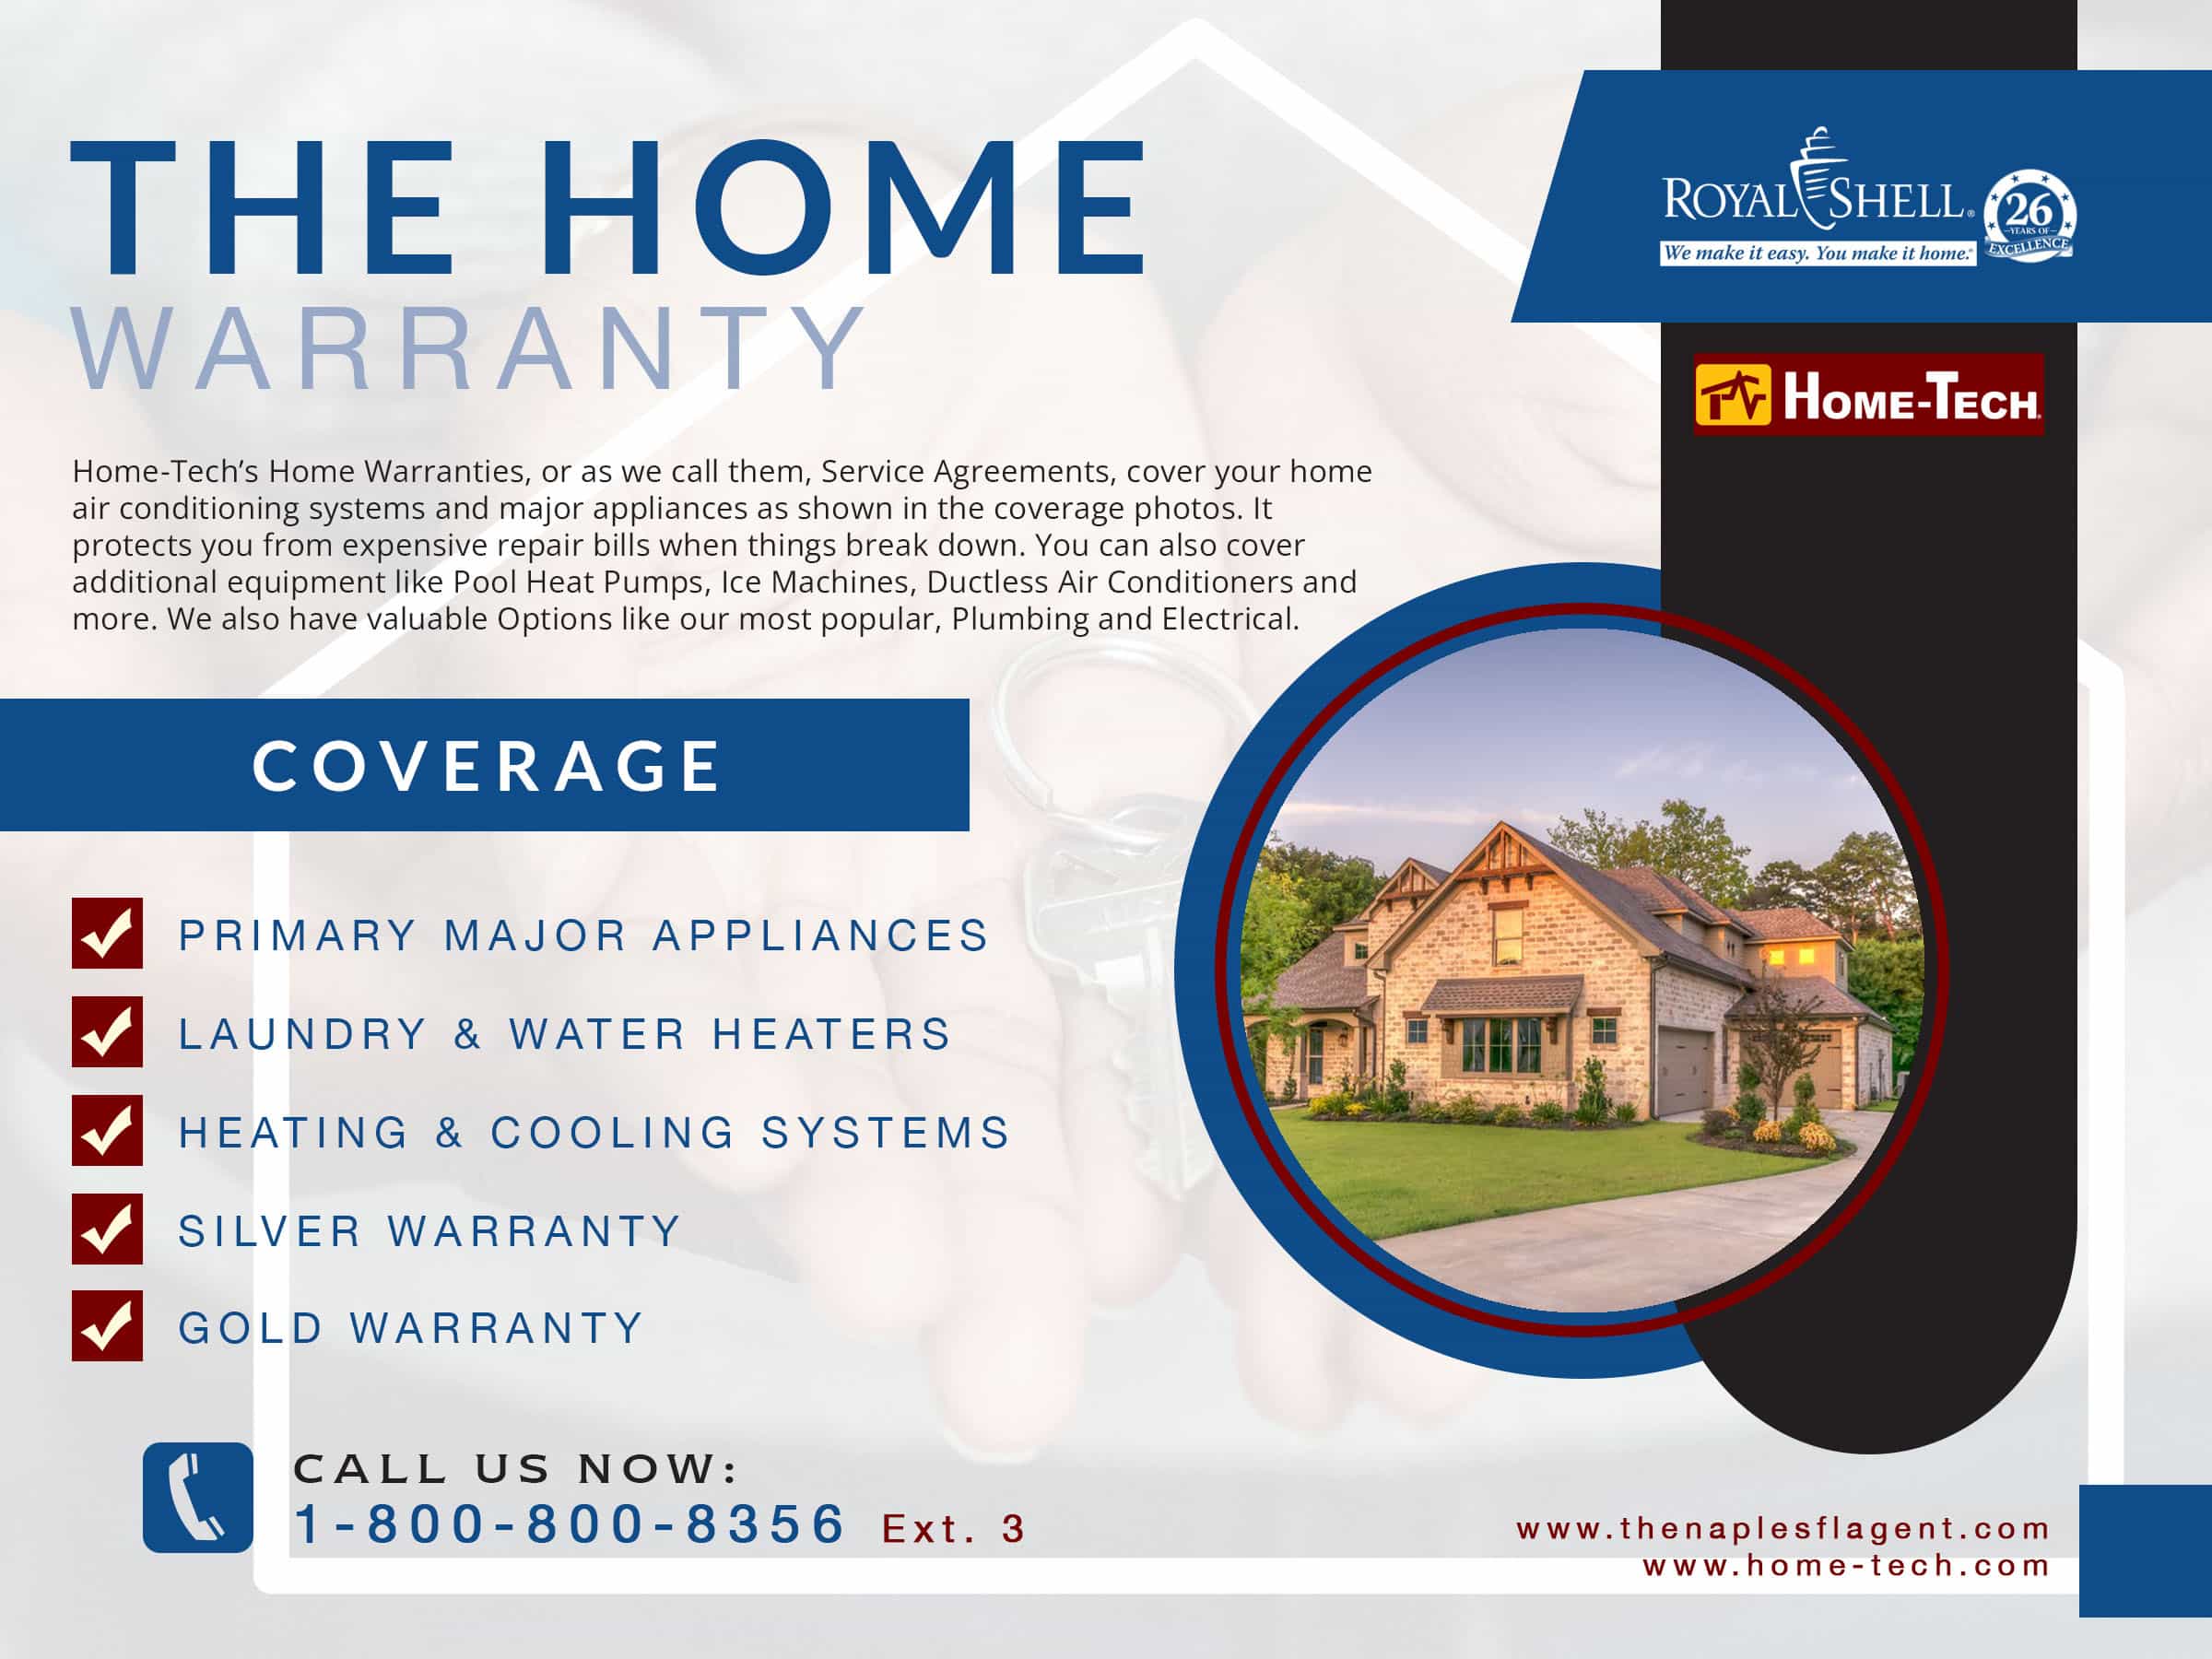 Royal Shell and Home-Tech home warranty